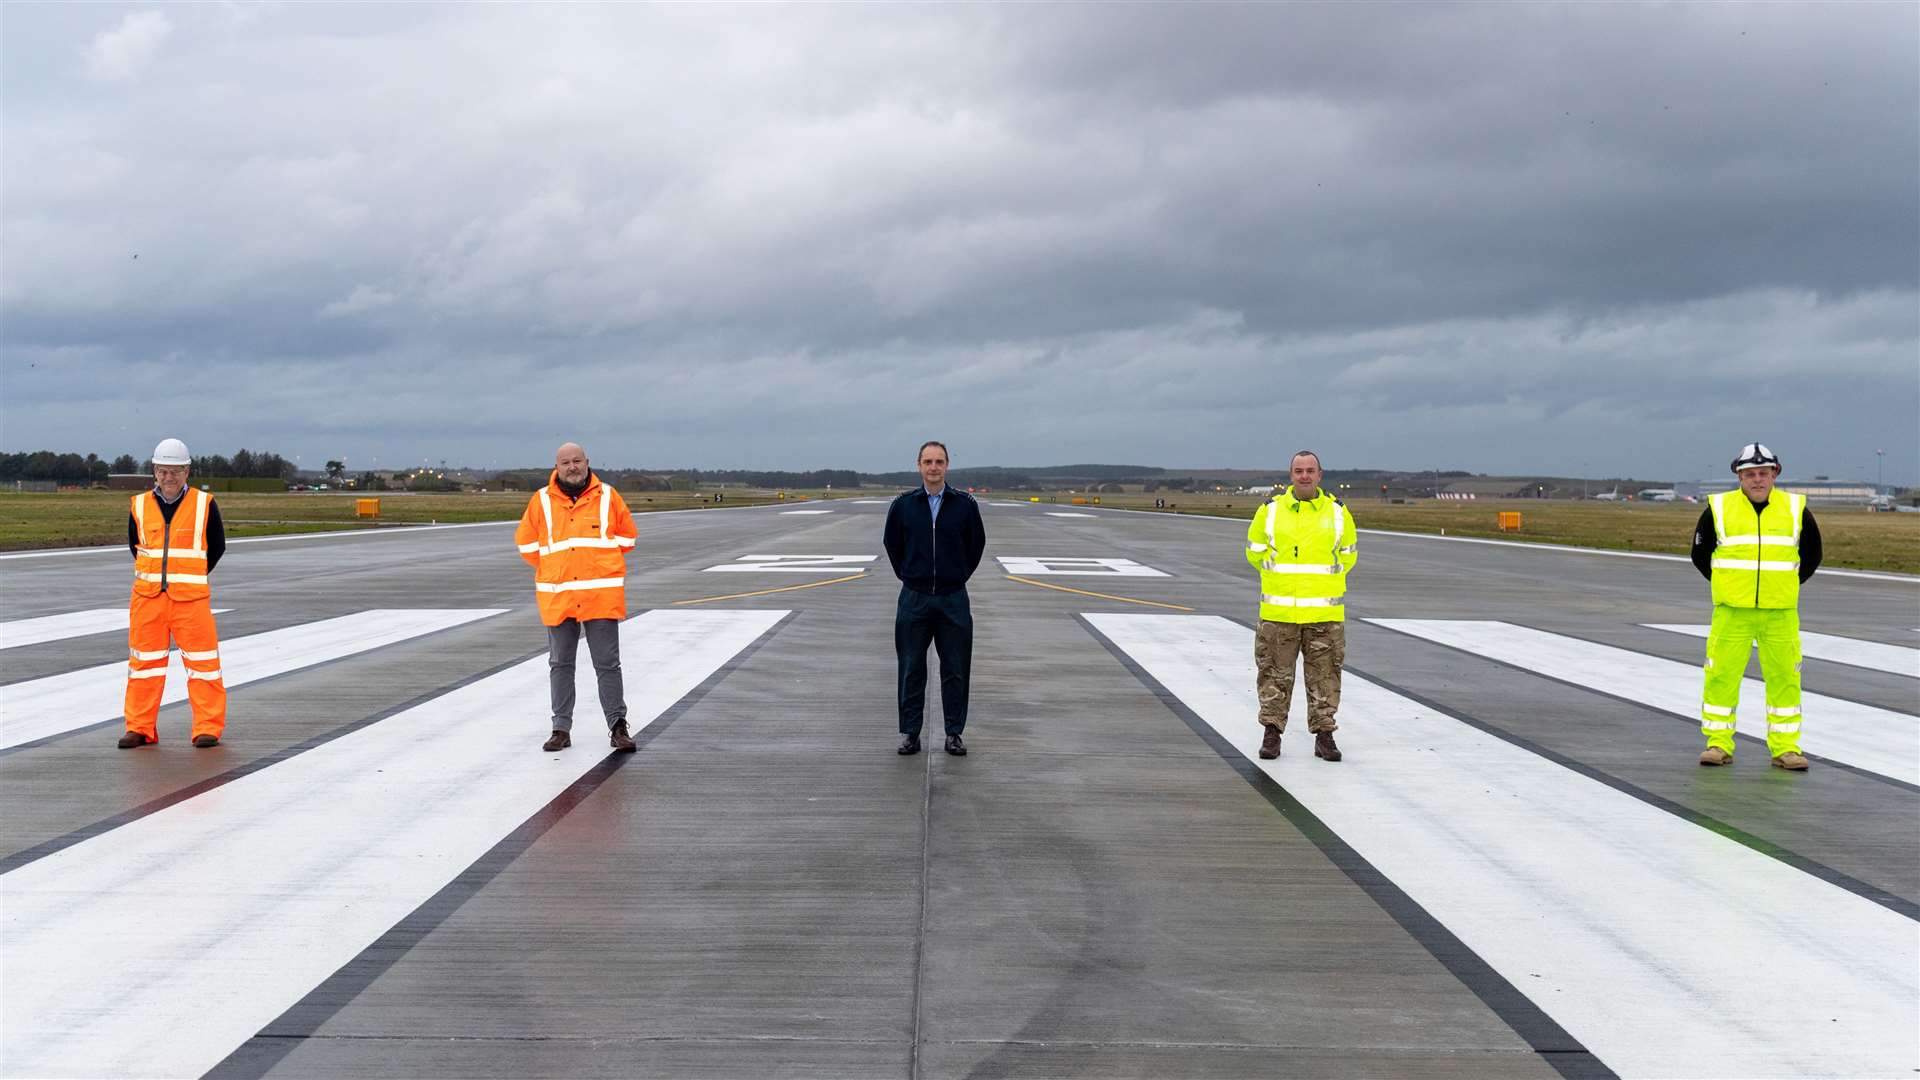 Representatives from DIO, VolkerFitzpatrick and RAF Lossiemouth mark the handover of the completed runway, (from left) Keith Mablethorpe, VolkerFitzpatrick project director, Russ Liddington, DIO project manager, Wg Cdr James Ash, RAF Lossiemouth, Wg Cdr Pete Beckett, Lossiemouth Development Project, and Andy Reynolds, VolkerFitzpatrick operations manager. Picture: Crown Copyright, 2020